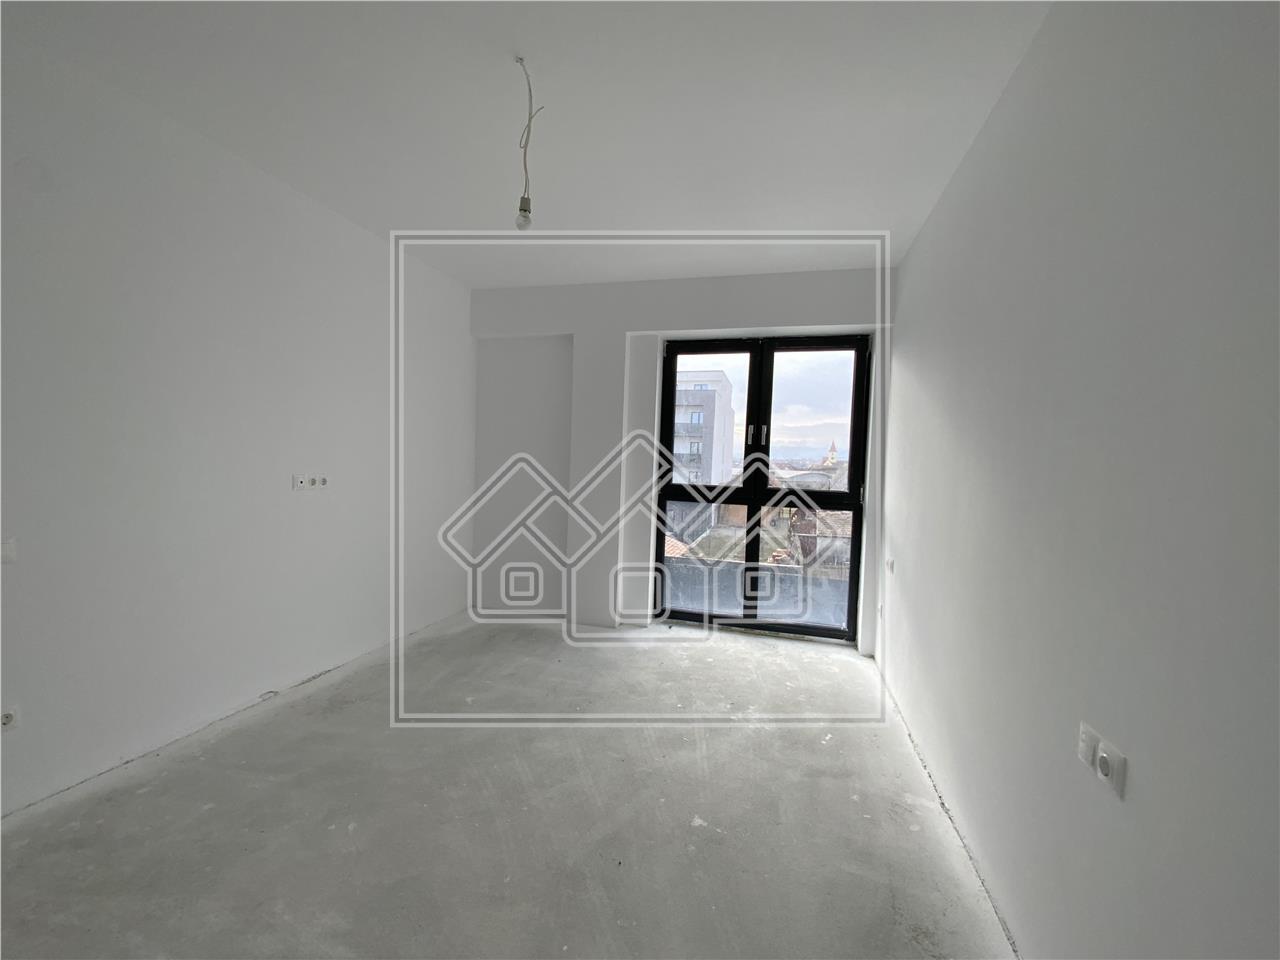 3-room apartment for sale in Sibiu - building with elevator